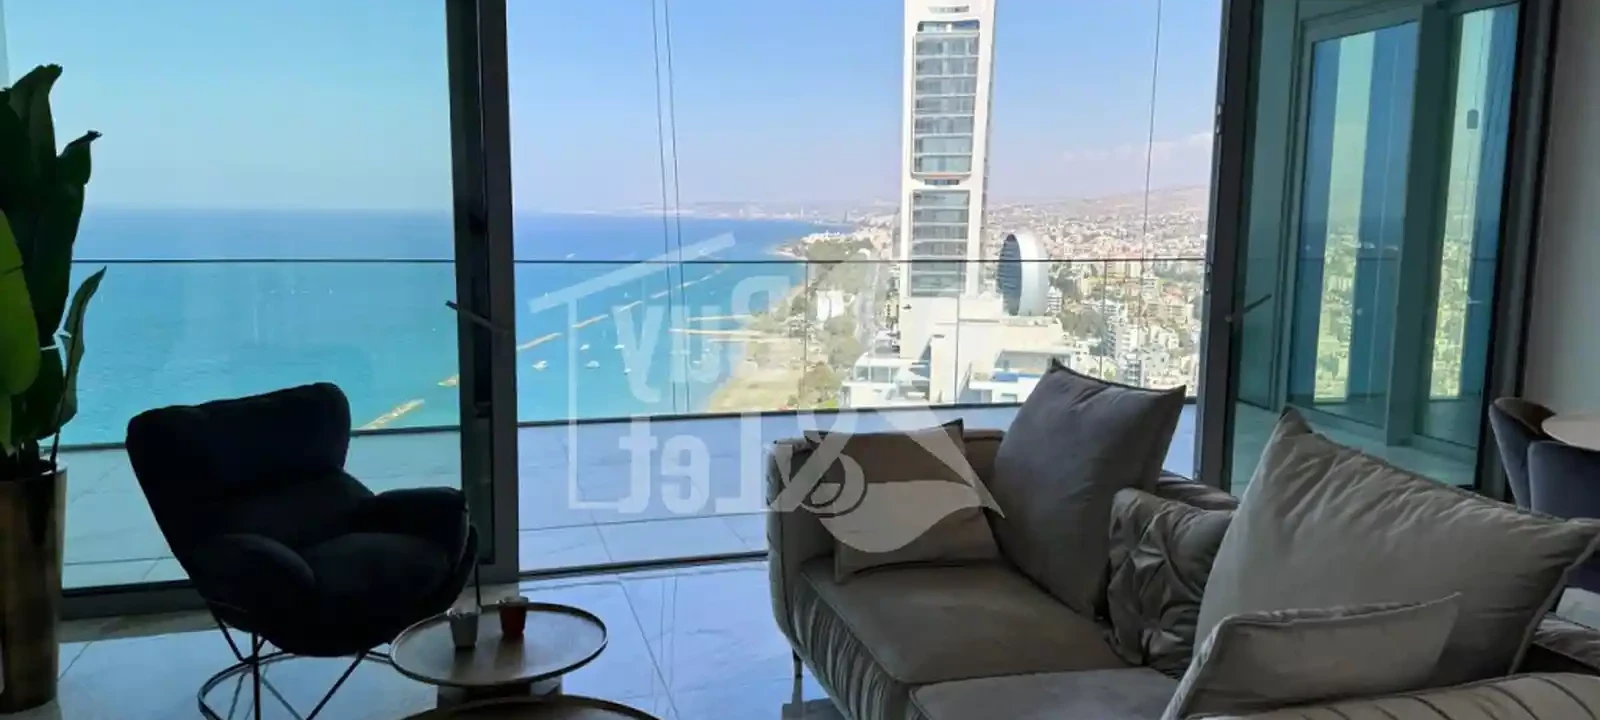 3-bedroom apartment to rent €2.630.000, image 1